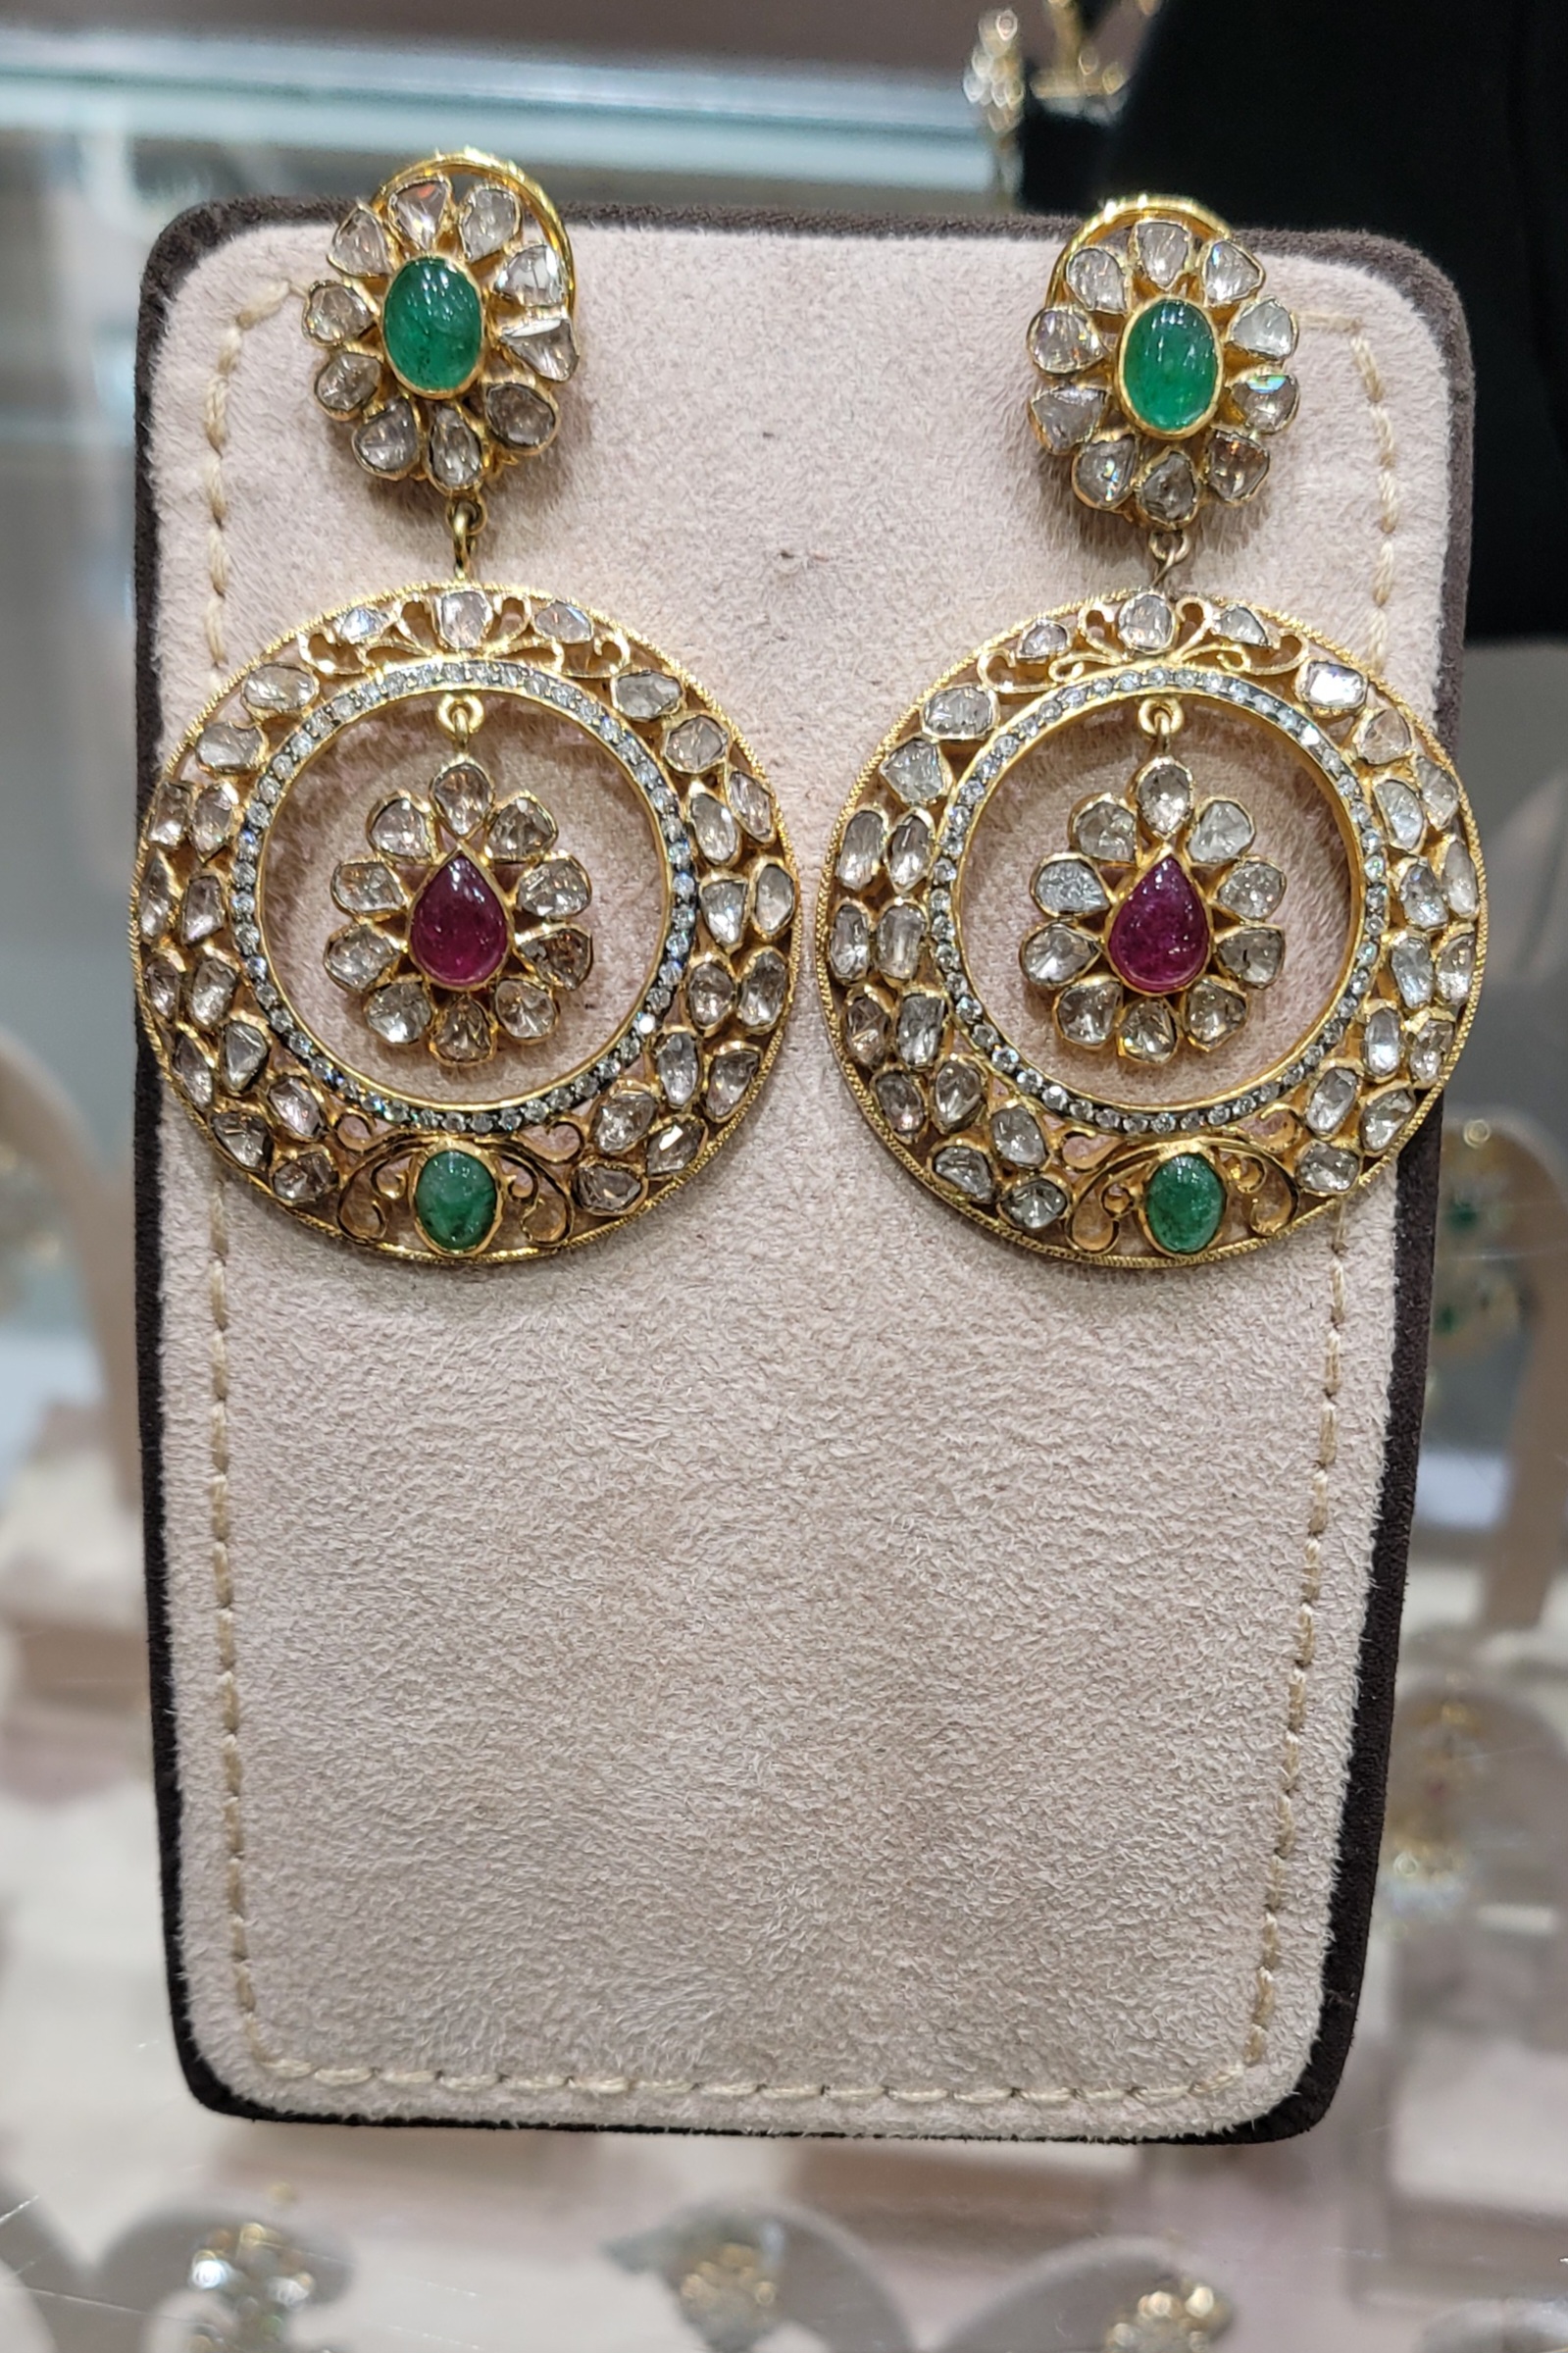 Temple Gold Earrings with Natural Emeralds/Rubies.